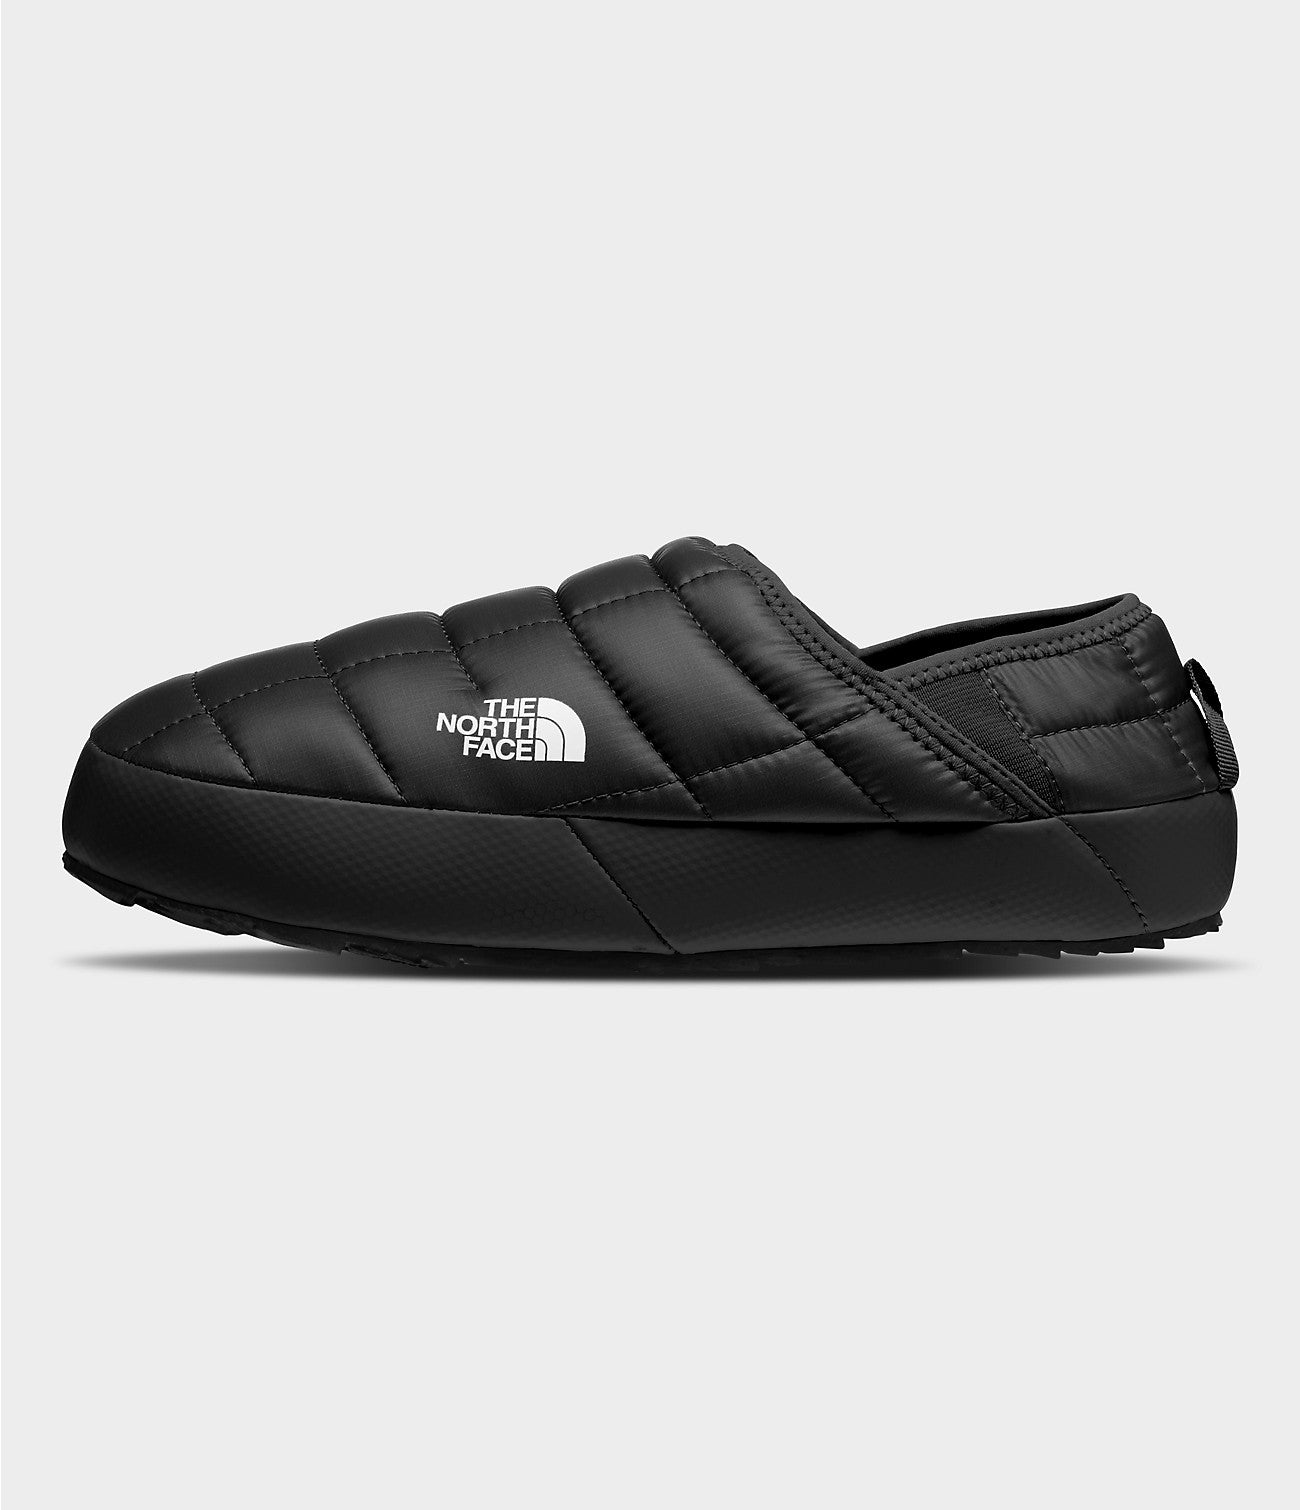 ThermoBall Traction Mule V pour femmes - TNF BLACK / TNF BLACK